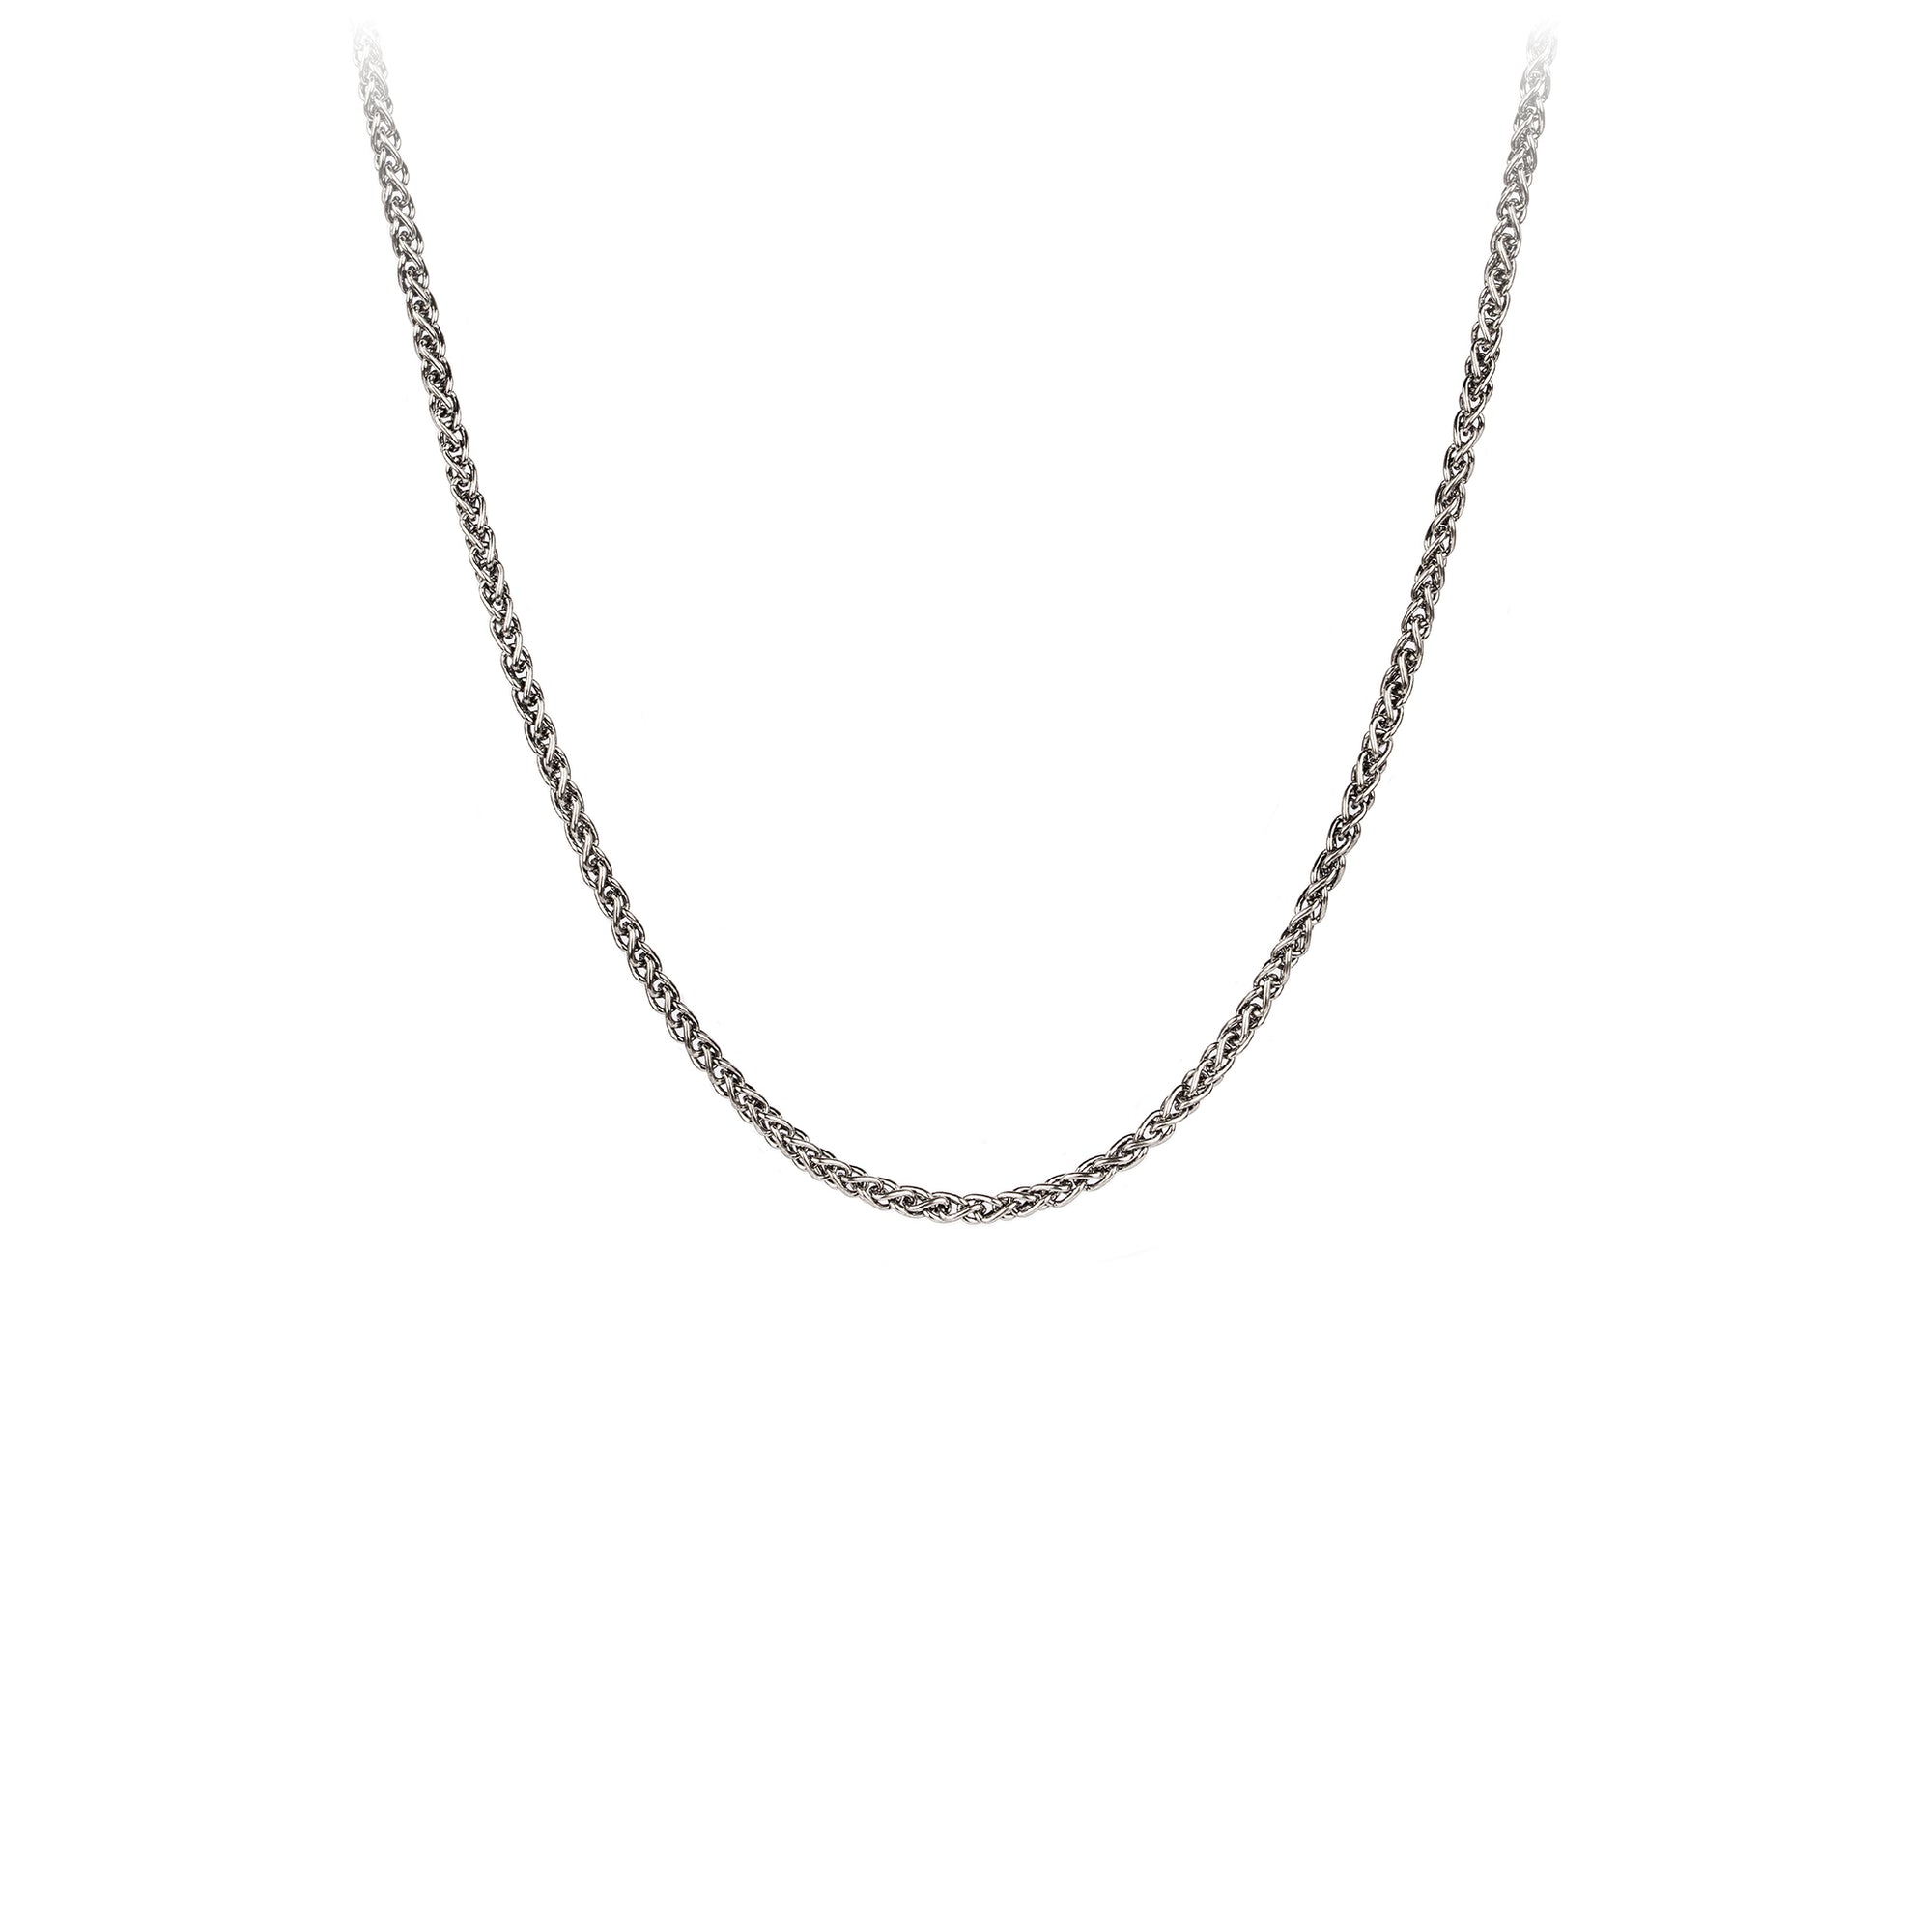 A sterling silver chain with oxidized medium wheat links